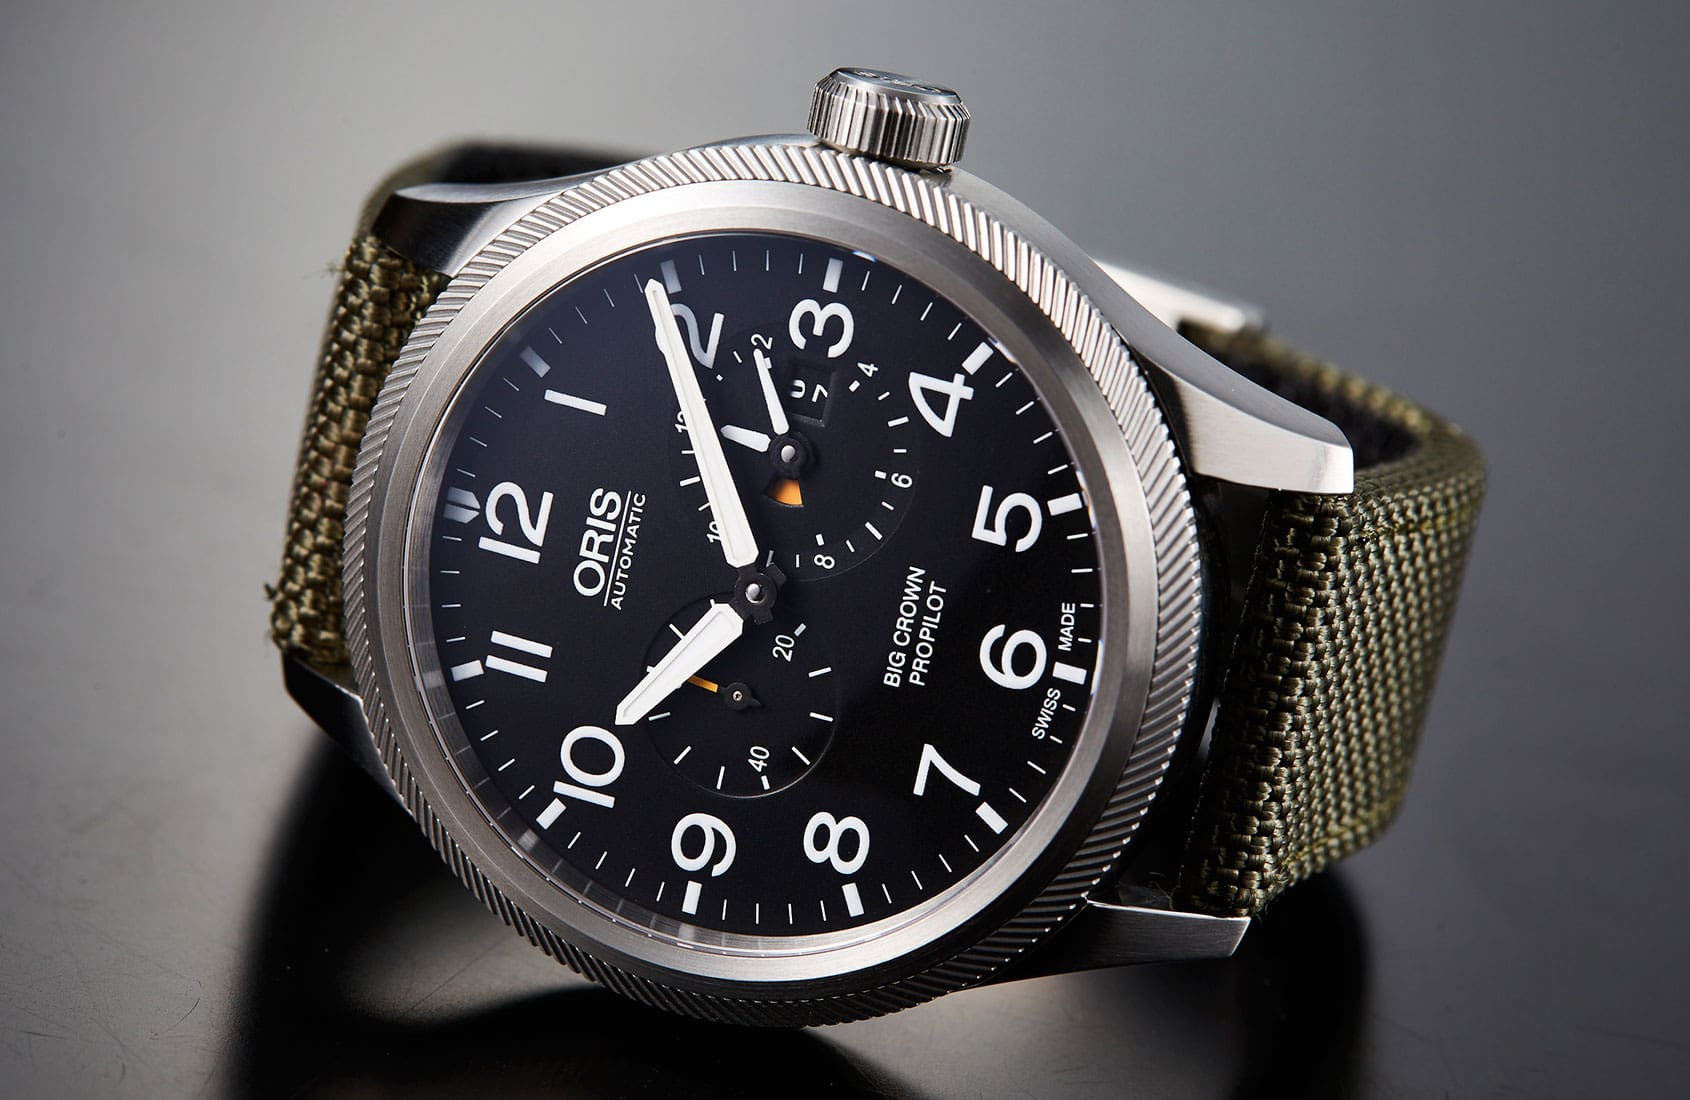 One of the coolest dual times we’ve seen in ages – the Oris Big Crown ProPilot Worldtimer